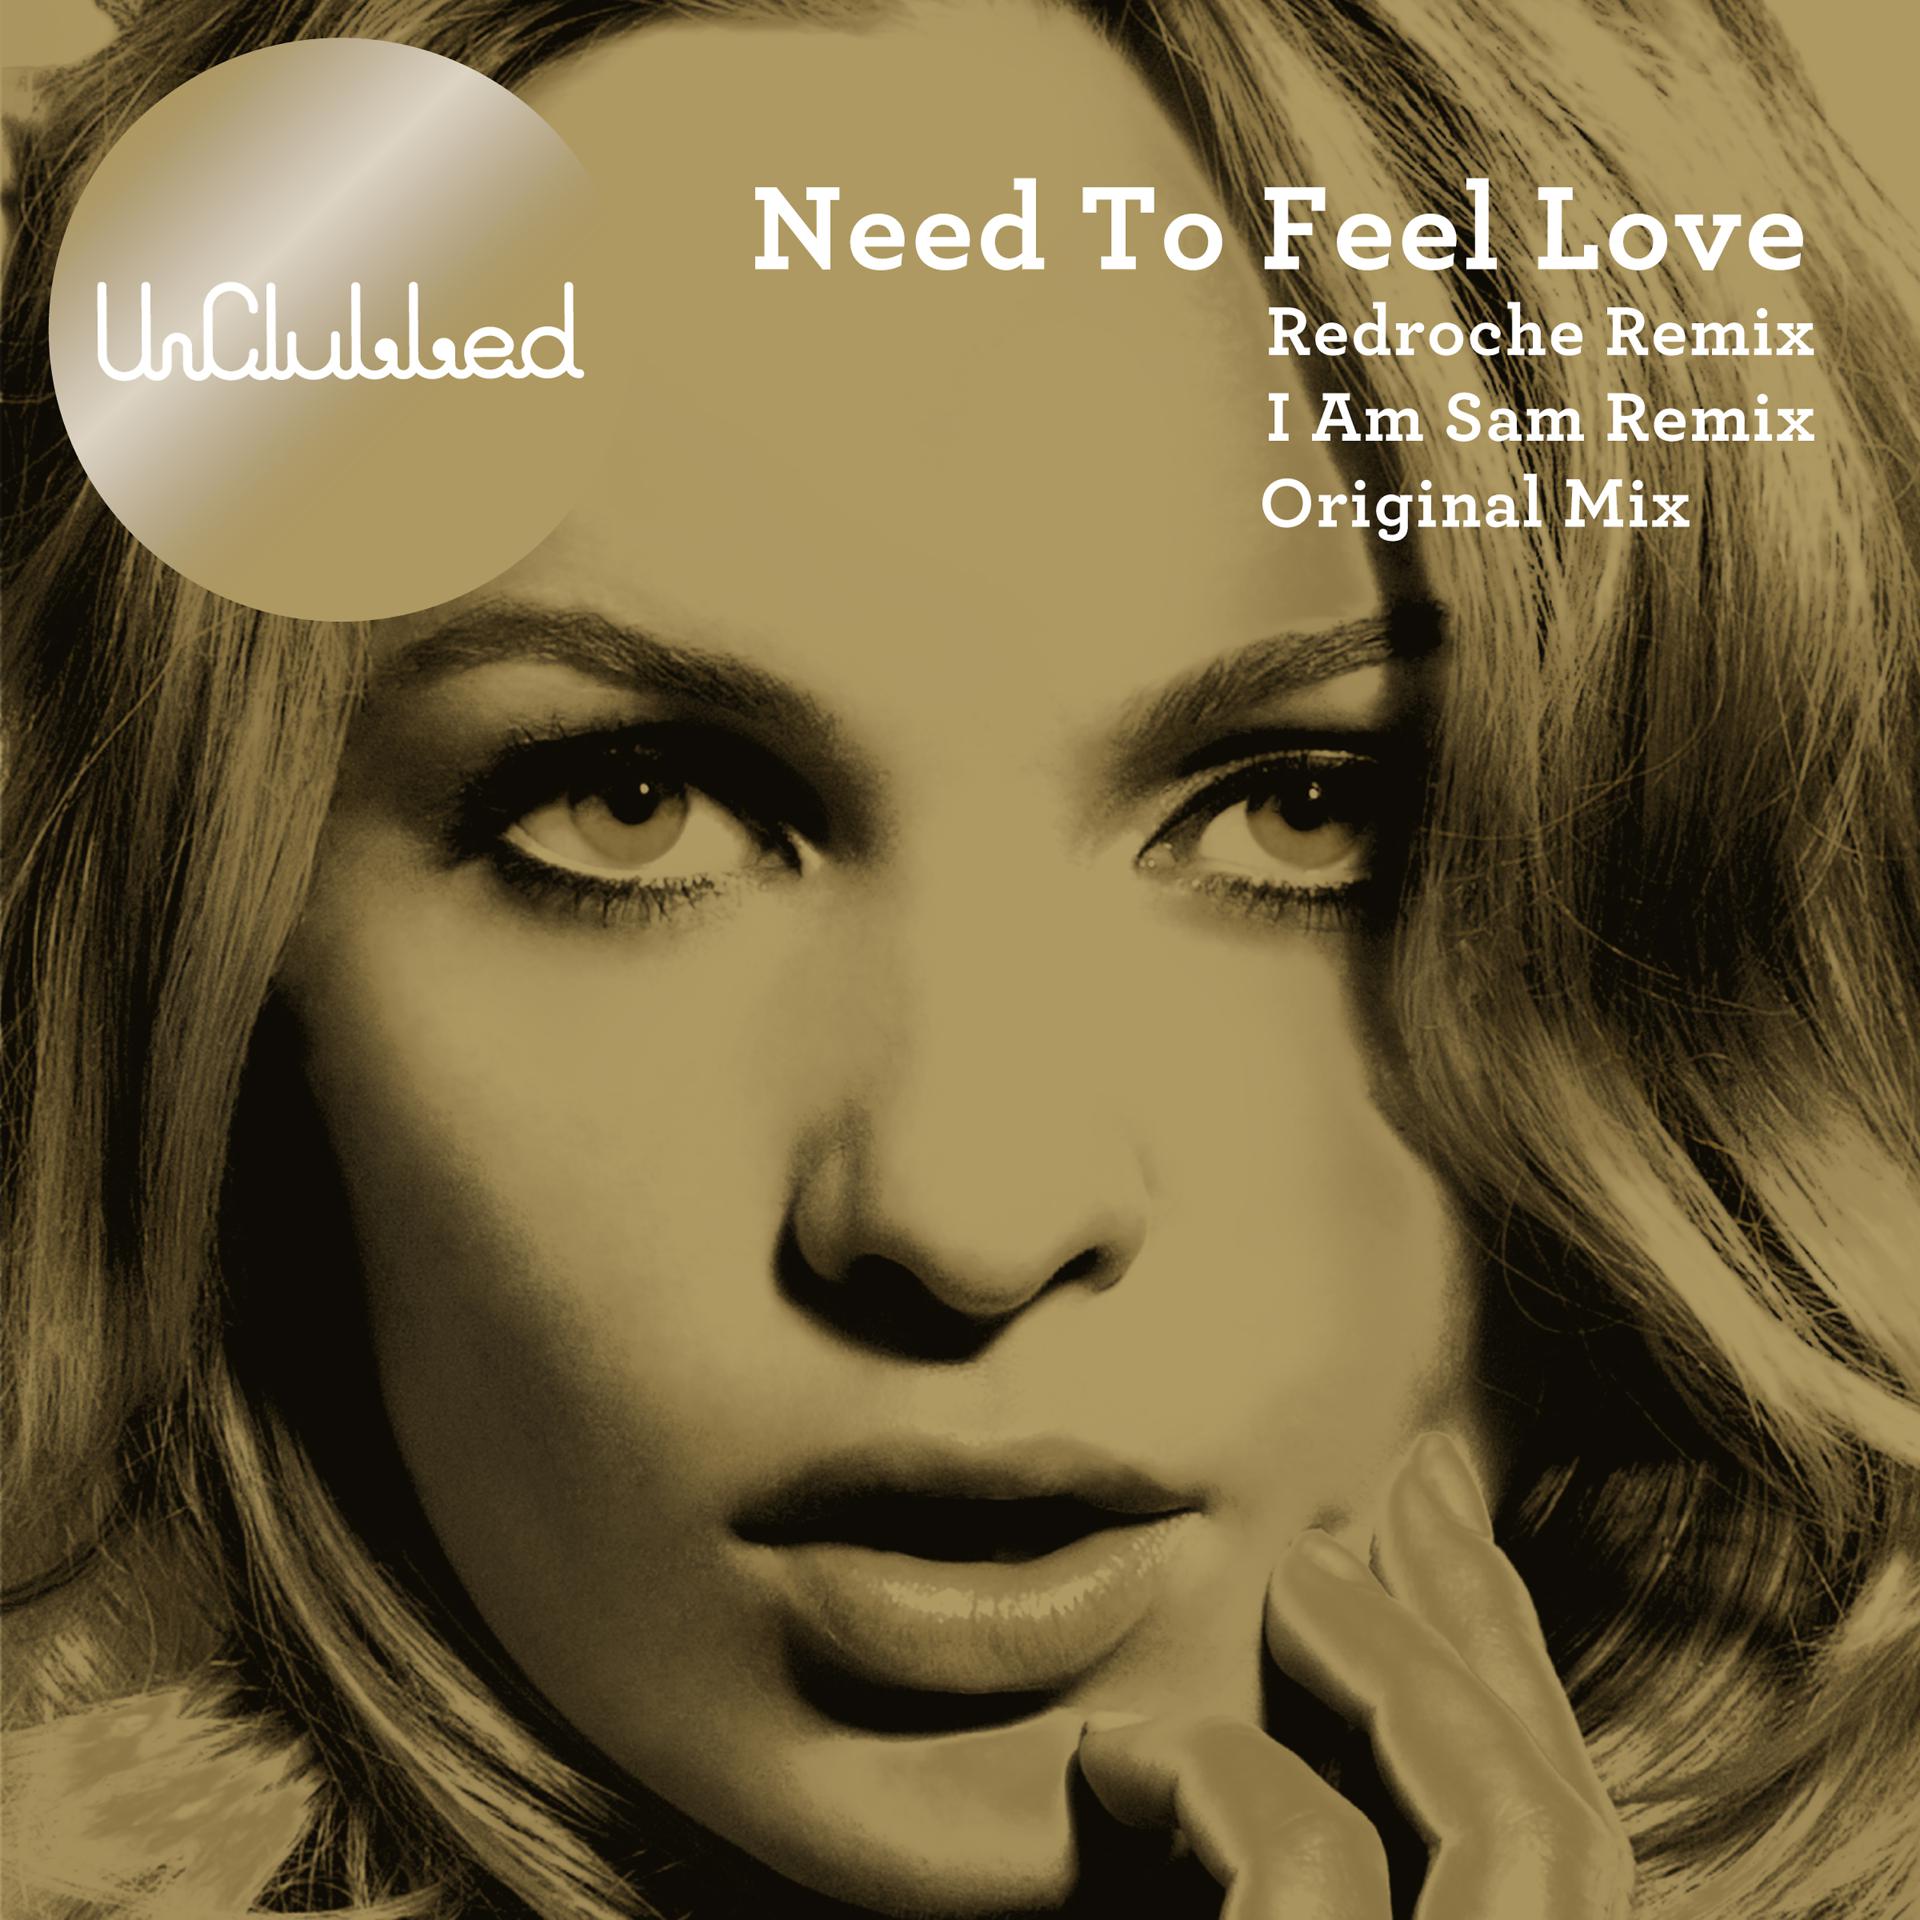 Need to feel loved feat delline. Zoe Durrant. Need to feel Loved. Adam k Soha need to feel Loved. Zoe Durrant фото.